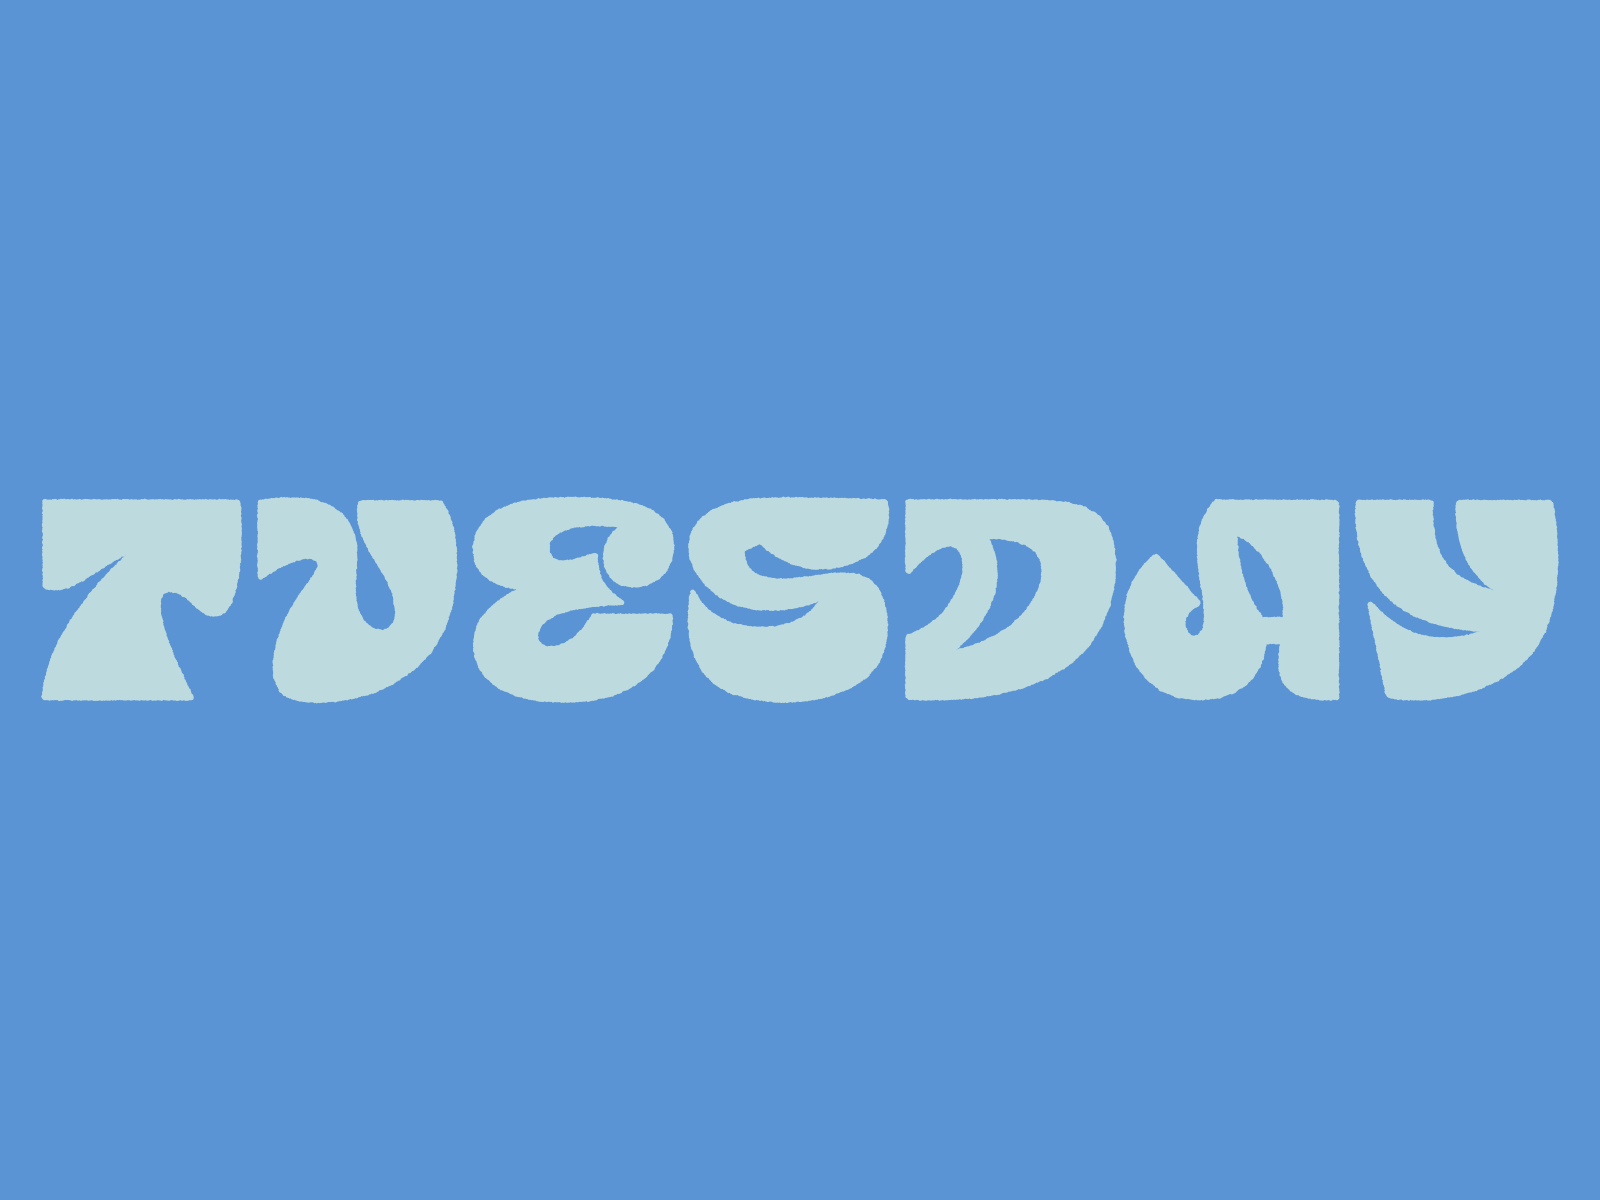 ✦ Lettering week — Tuesday ✦ art design drawing illustration lettering tuesday week